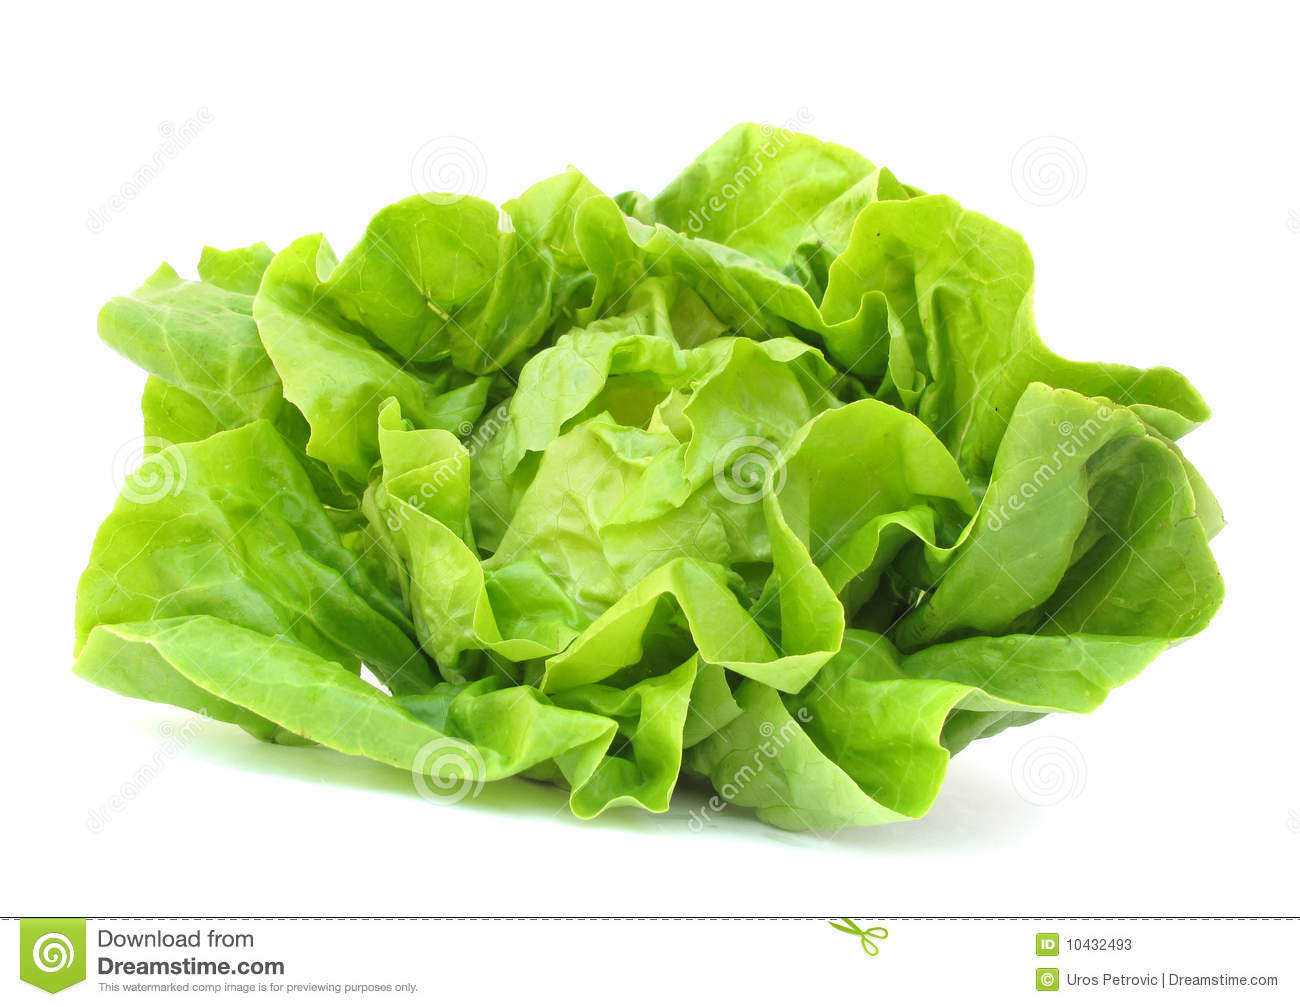 The Lettuce  Lactuca Sativa  Is A Temperate Annual Or Biennial Plant